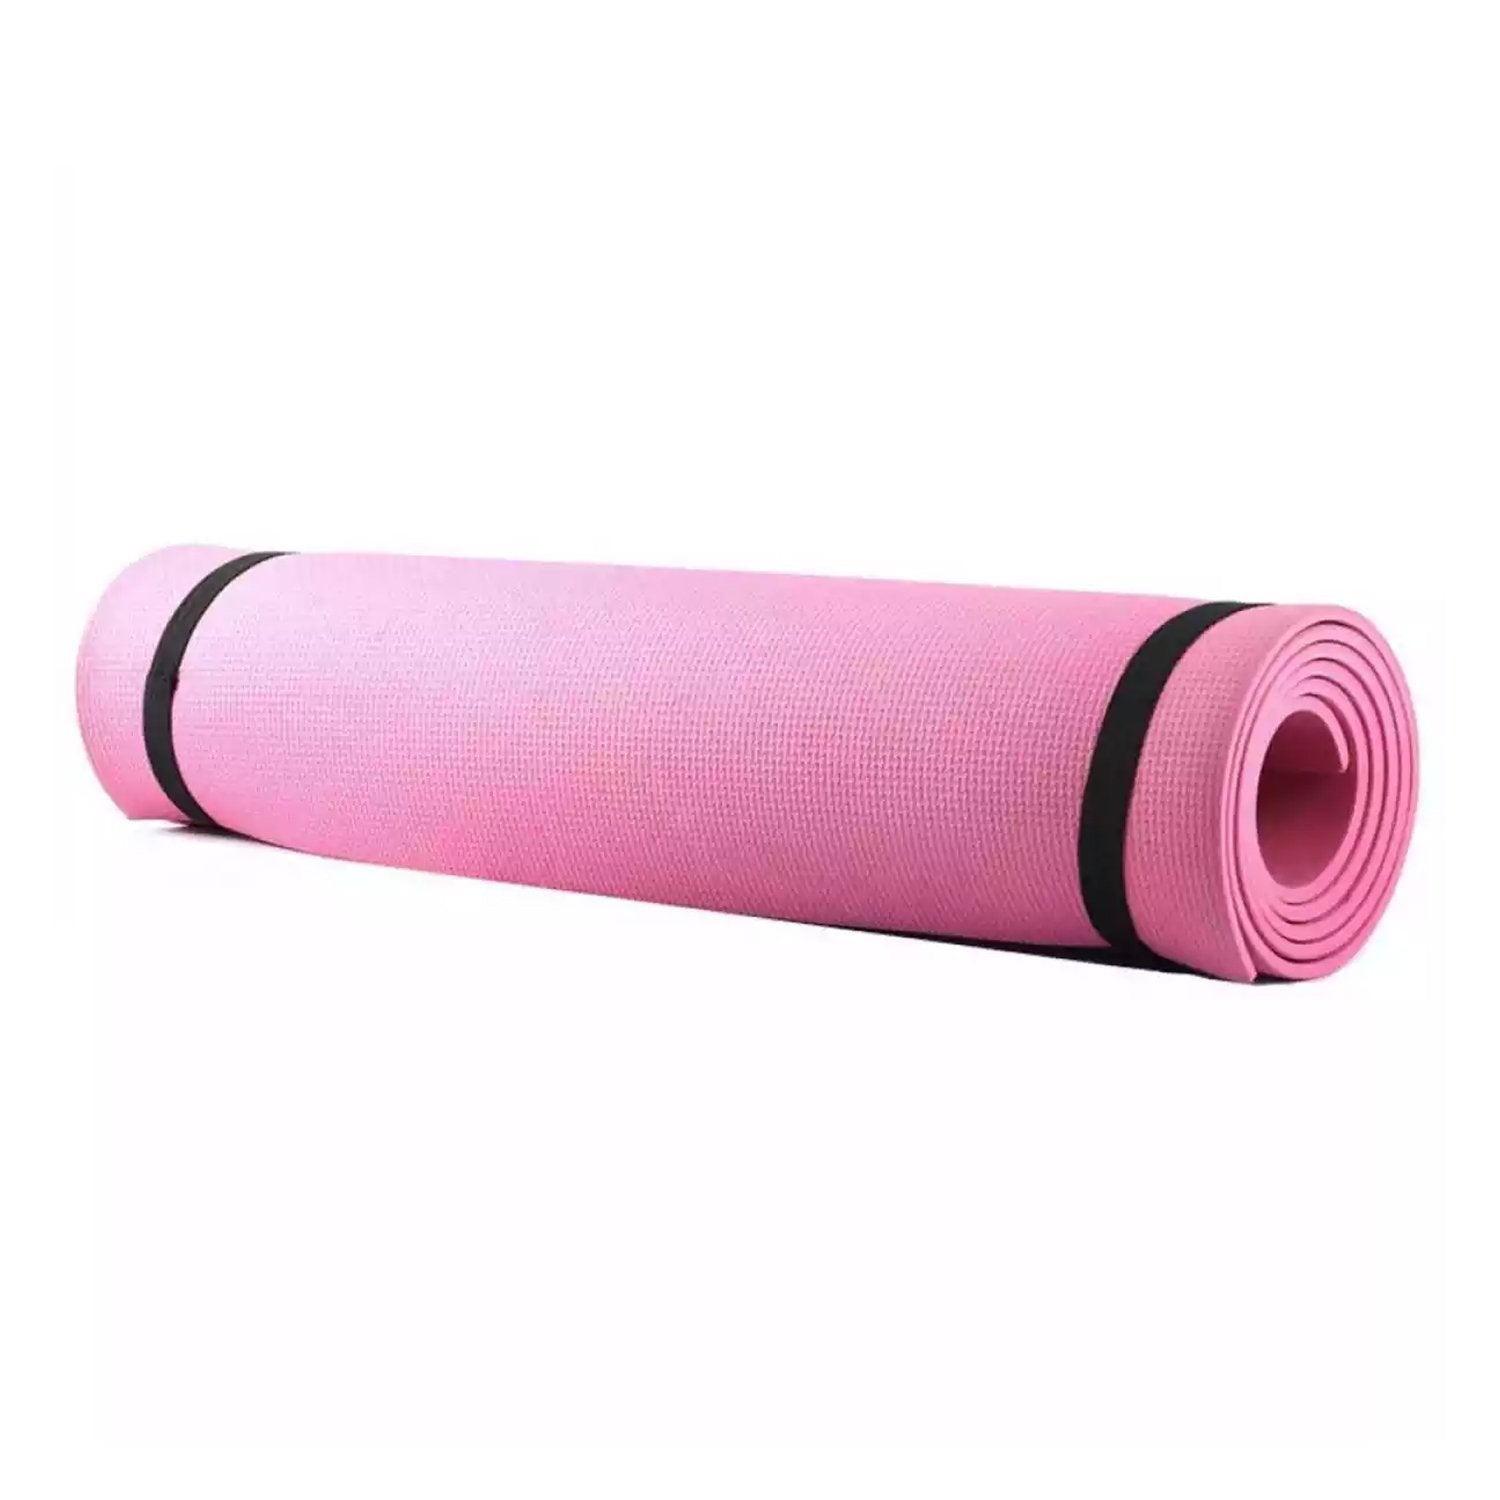 1799 Yoga Mat Multi-use Thick Exercise Mat (8mm Thickness)